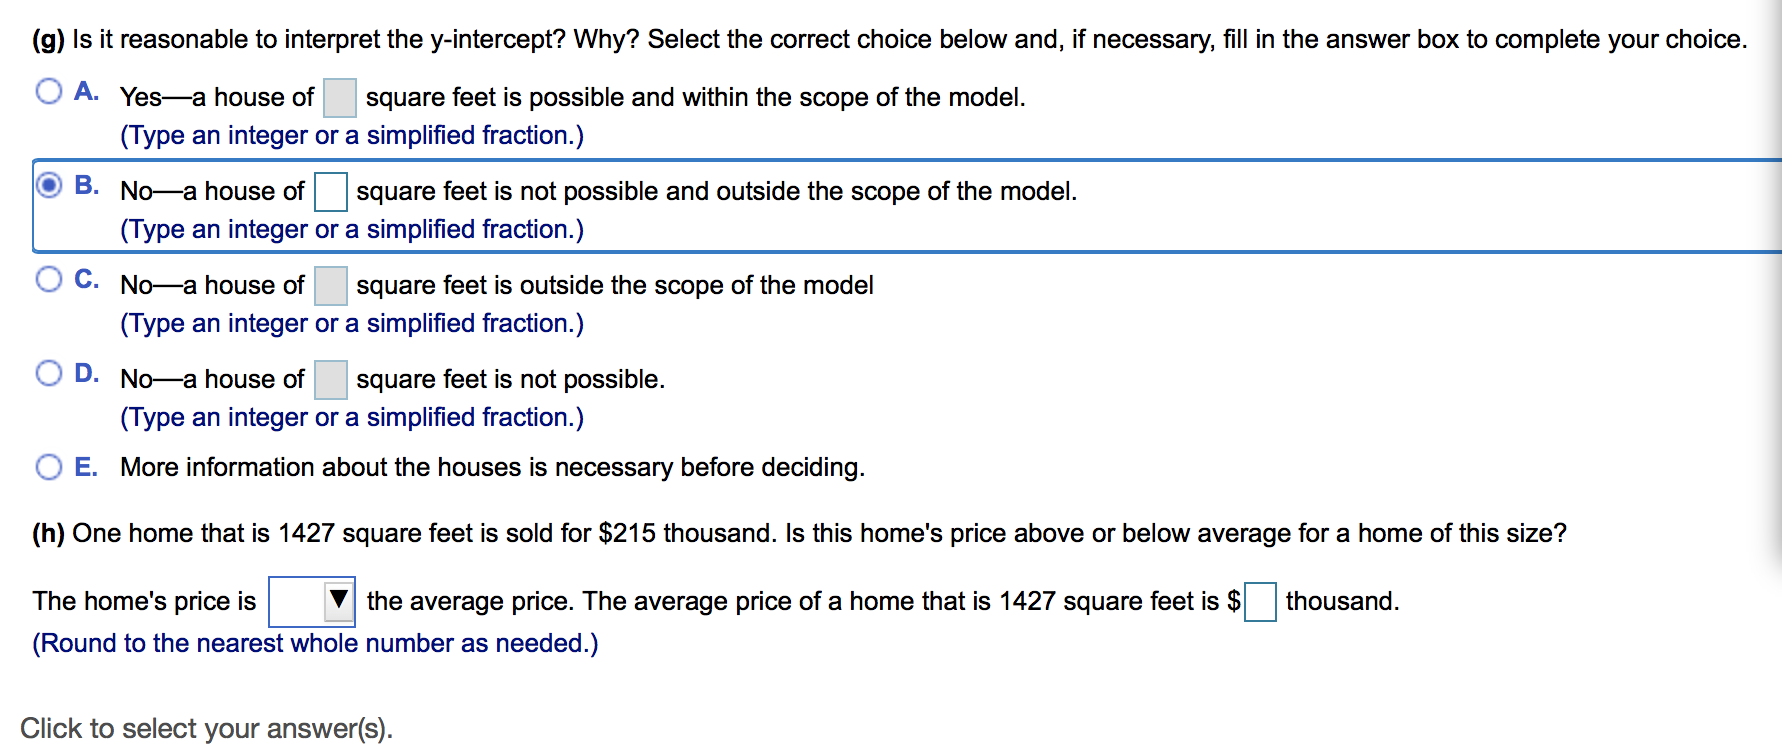 (g) Is it reasonable to interpret the y-intercept? Why? Select the correct choice below and, if necessary, fill in the answer box to complete your choice
A. Yes-a house of
square feet is possible and within the scope of the model
(Type an integer or a simplified fraction.)
B. No-a house of
square feet is not possible and outside the scope of the model.
(Type an integer or a simplified fraction.)
C. No-a house of
square feet is outside the scope of the model
(Type an integer or a simplified fraction.)
D. No-a house of
square feet is not possible
(Type an integer or a simplified fraction.)
O E. More information about the houses is necessary before deciding
(h) One home that is 1427 square feet is sold for $215 thousand. Is this home's price above or below average for a home of this size?
thousand
The home's price is
the average price. The average price of a home that is 1427 square feet is $
(Round to the nearest whole number as needed.)
Click to select your answer(s)
